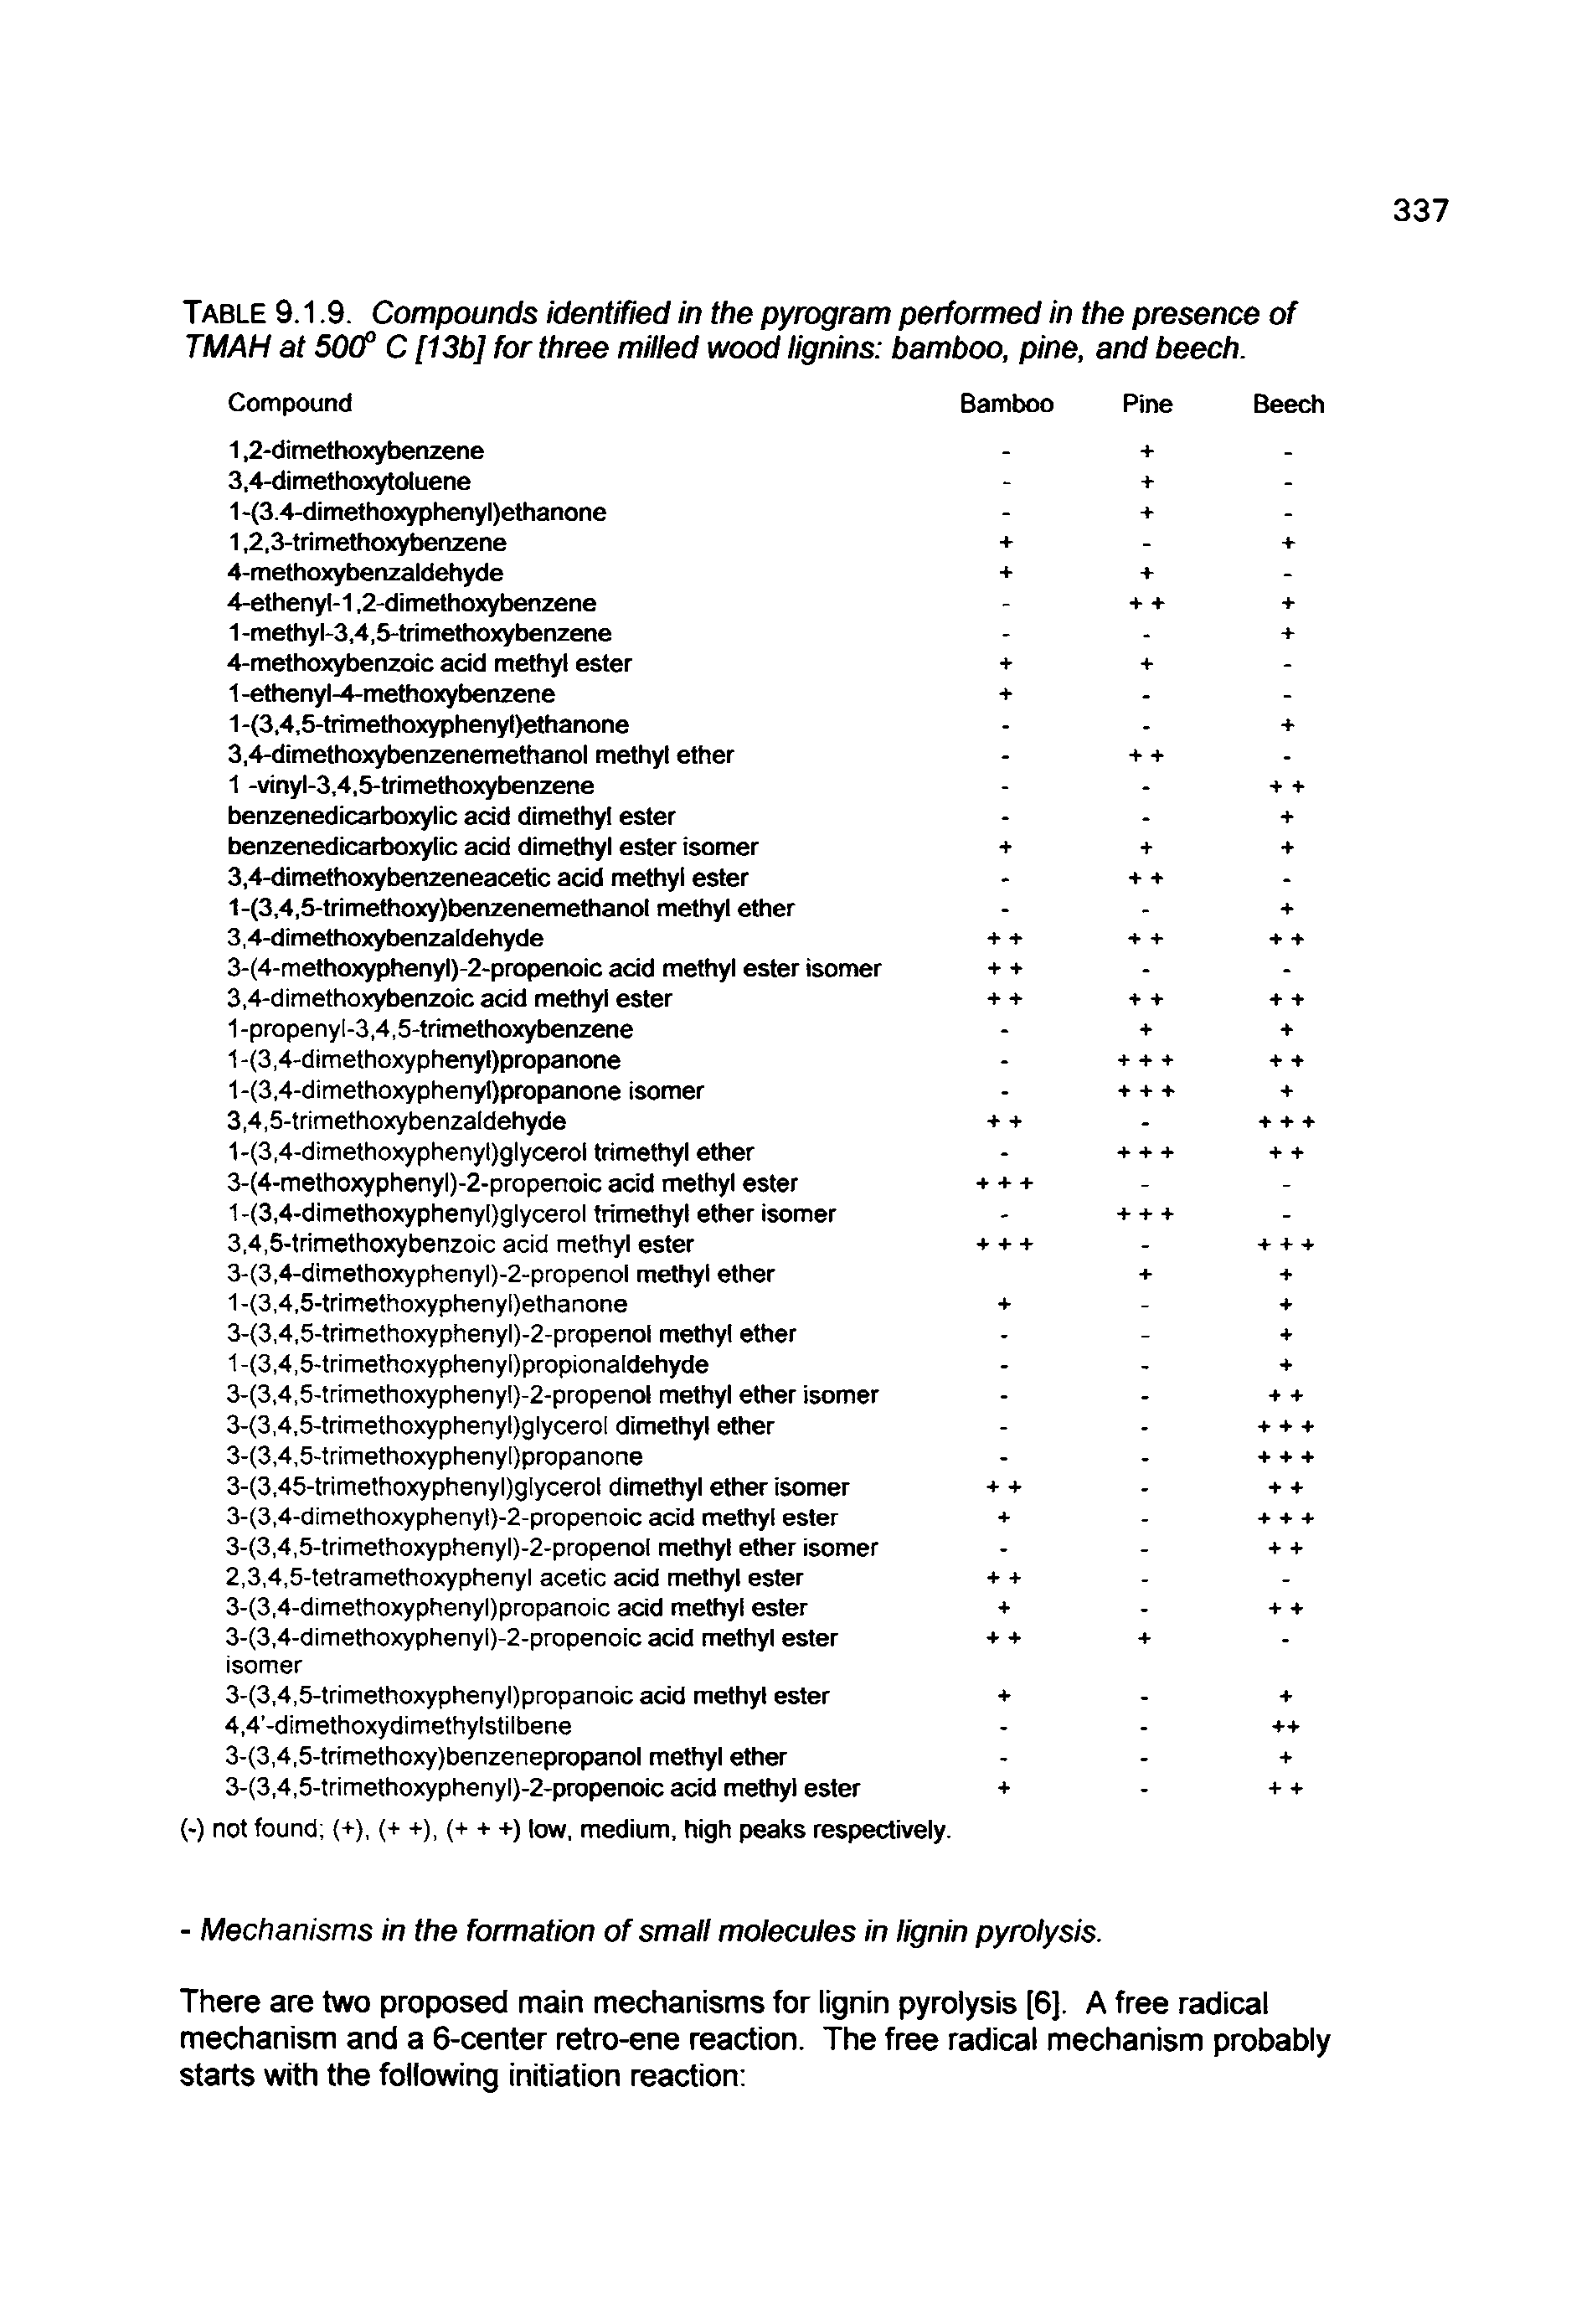 Table 9.1.9. Compounds identified in the pyrogram performed in the presence of TMAH at 50(f C [13b] for three milled wood lignins bamboo, pine, and beech.